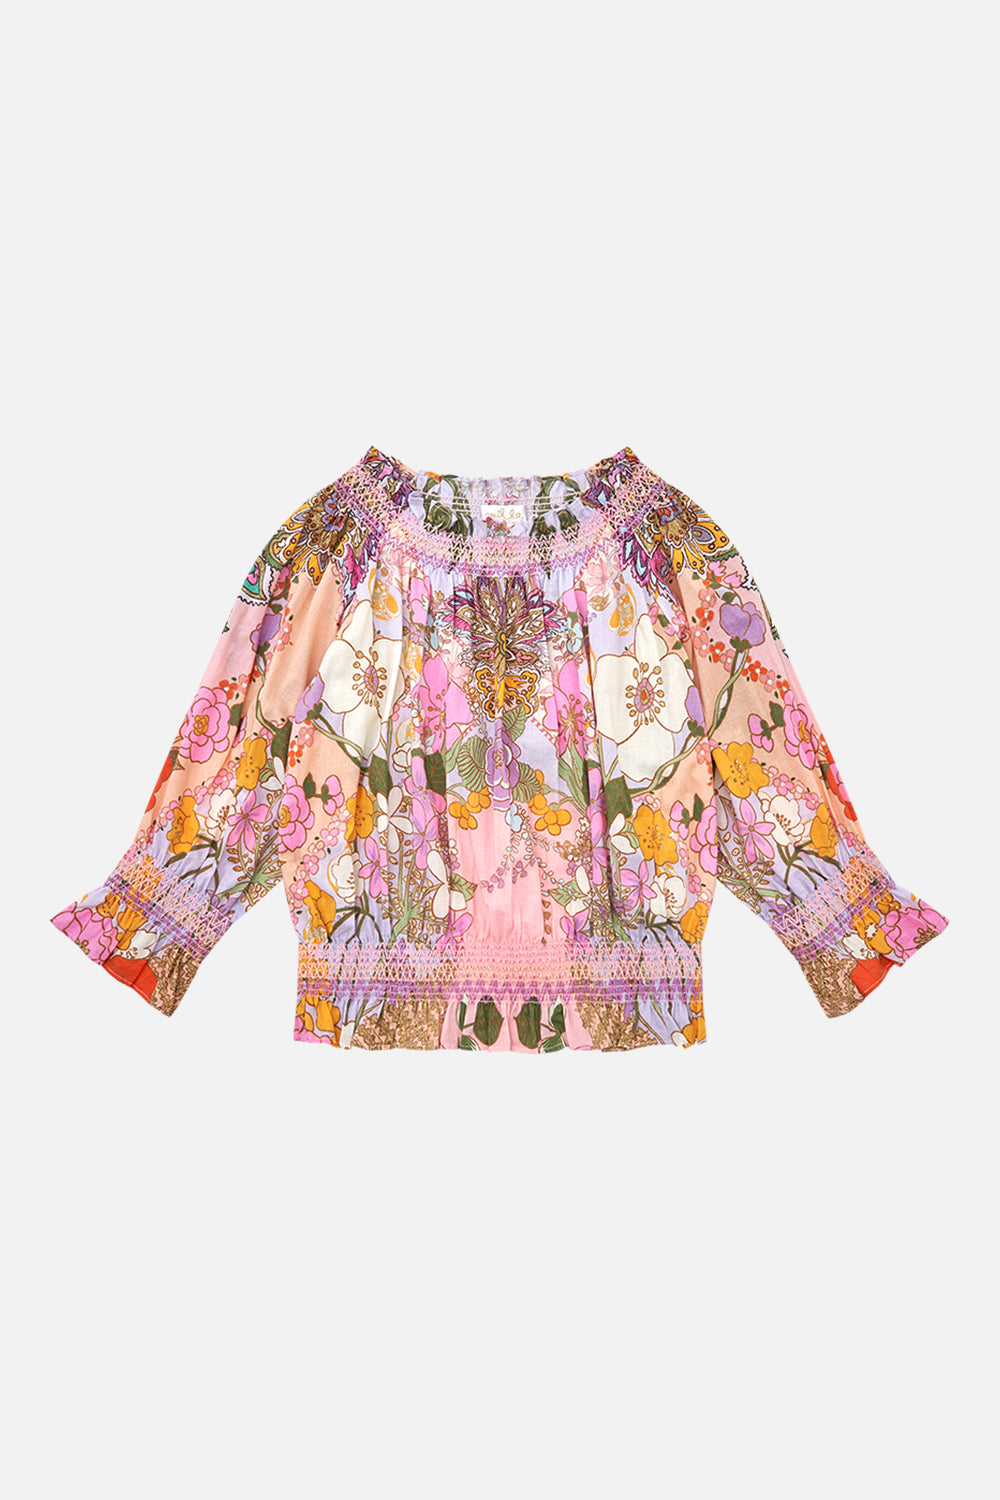 Milla by CAMILLA kids pink floral off the shoulder top in Clever Clogs print